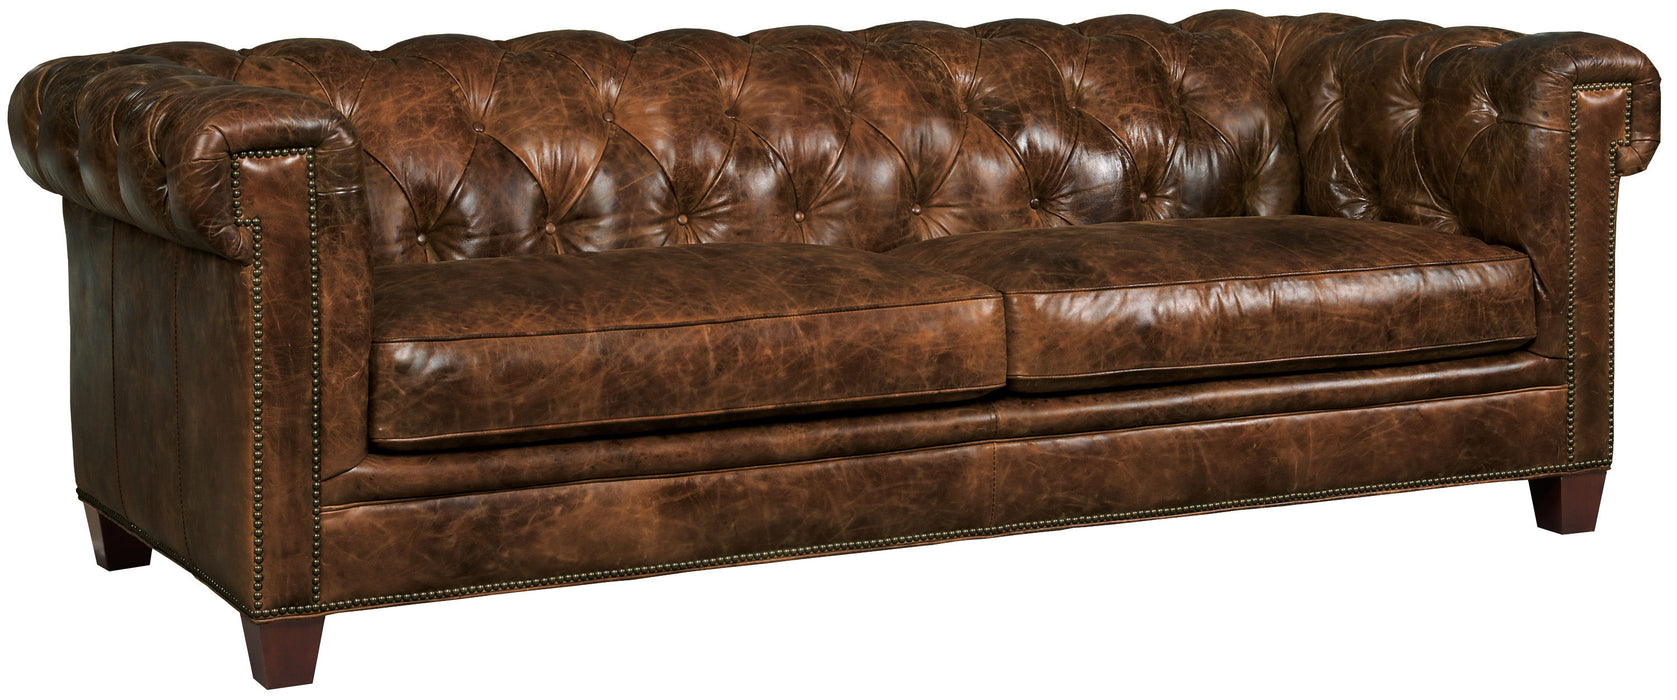 Chester - Stationary Sofa Capital Discount Furniture